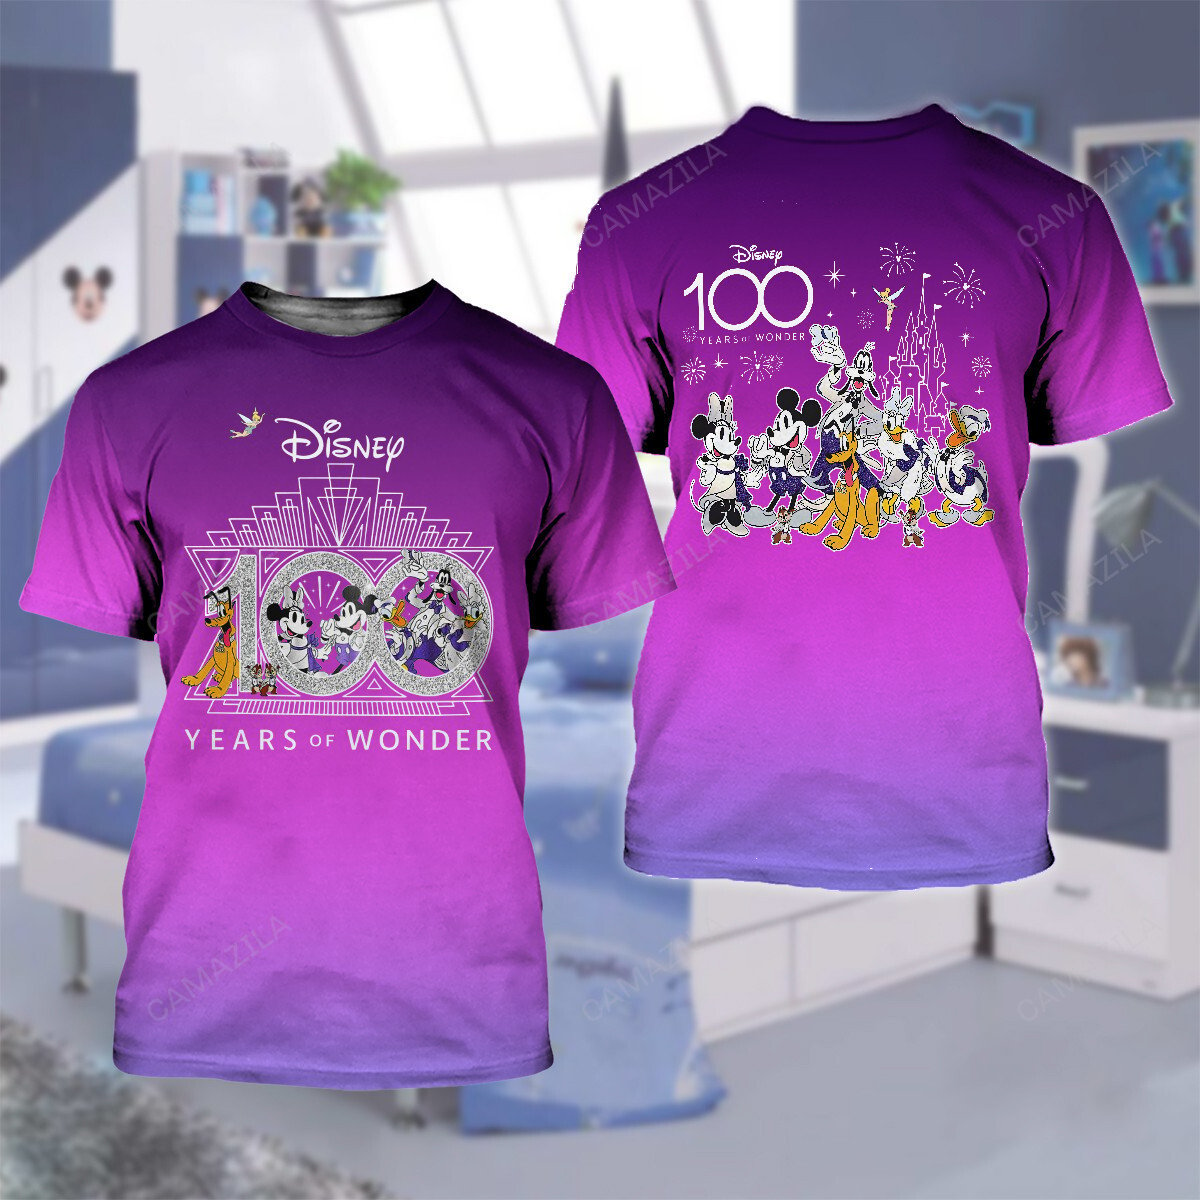 mickey and minnie mouse cartoon disney 100 years of wonder purple shirt 3106 HIC6a